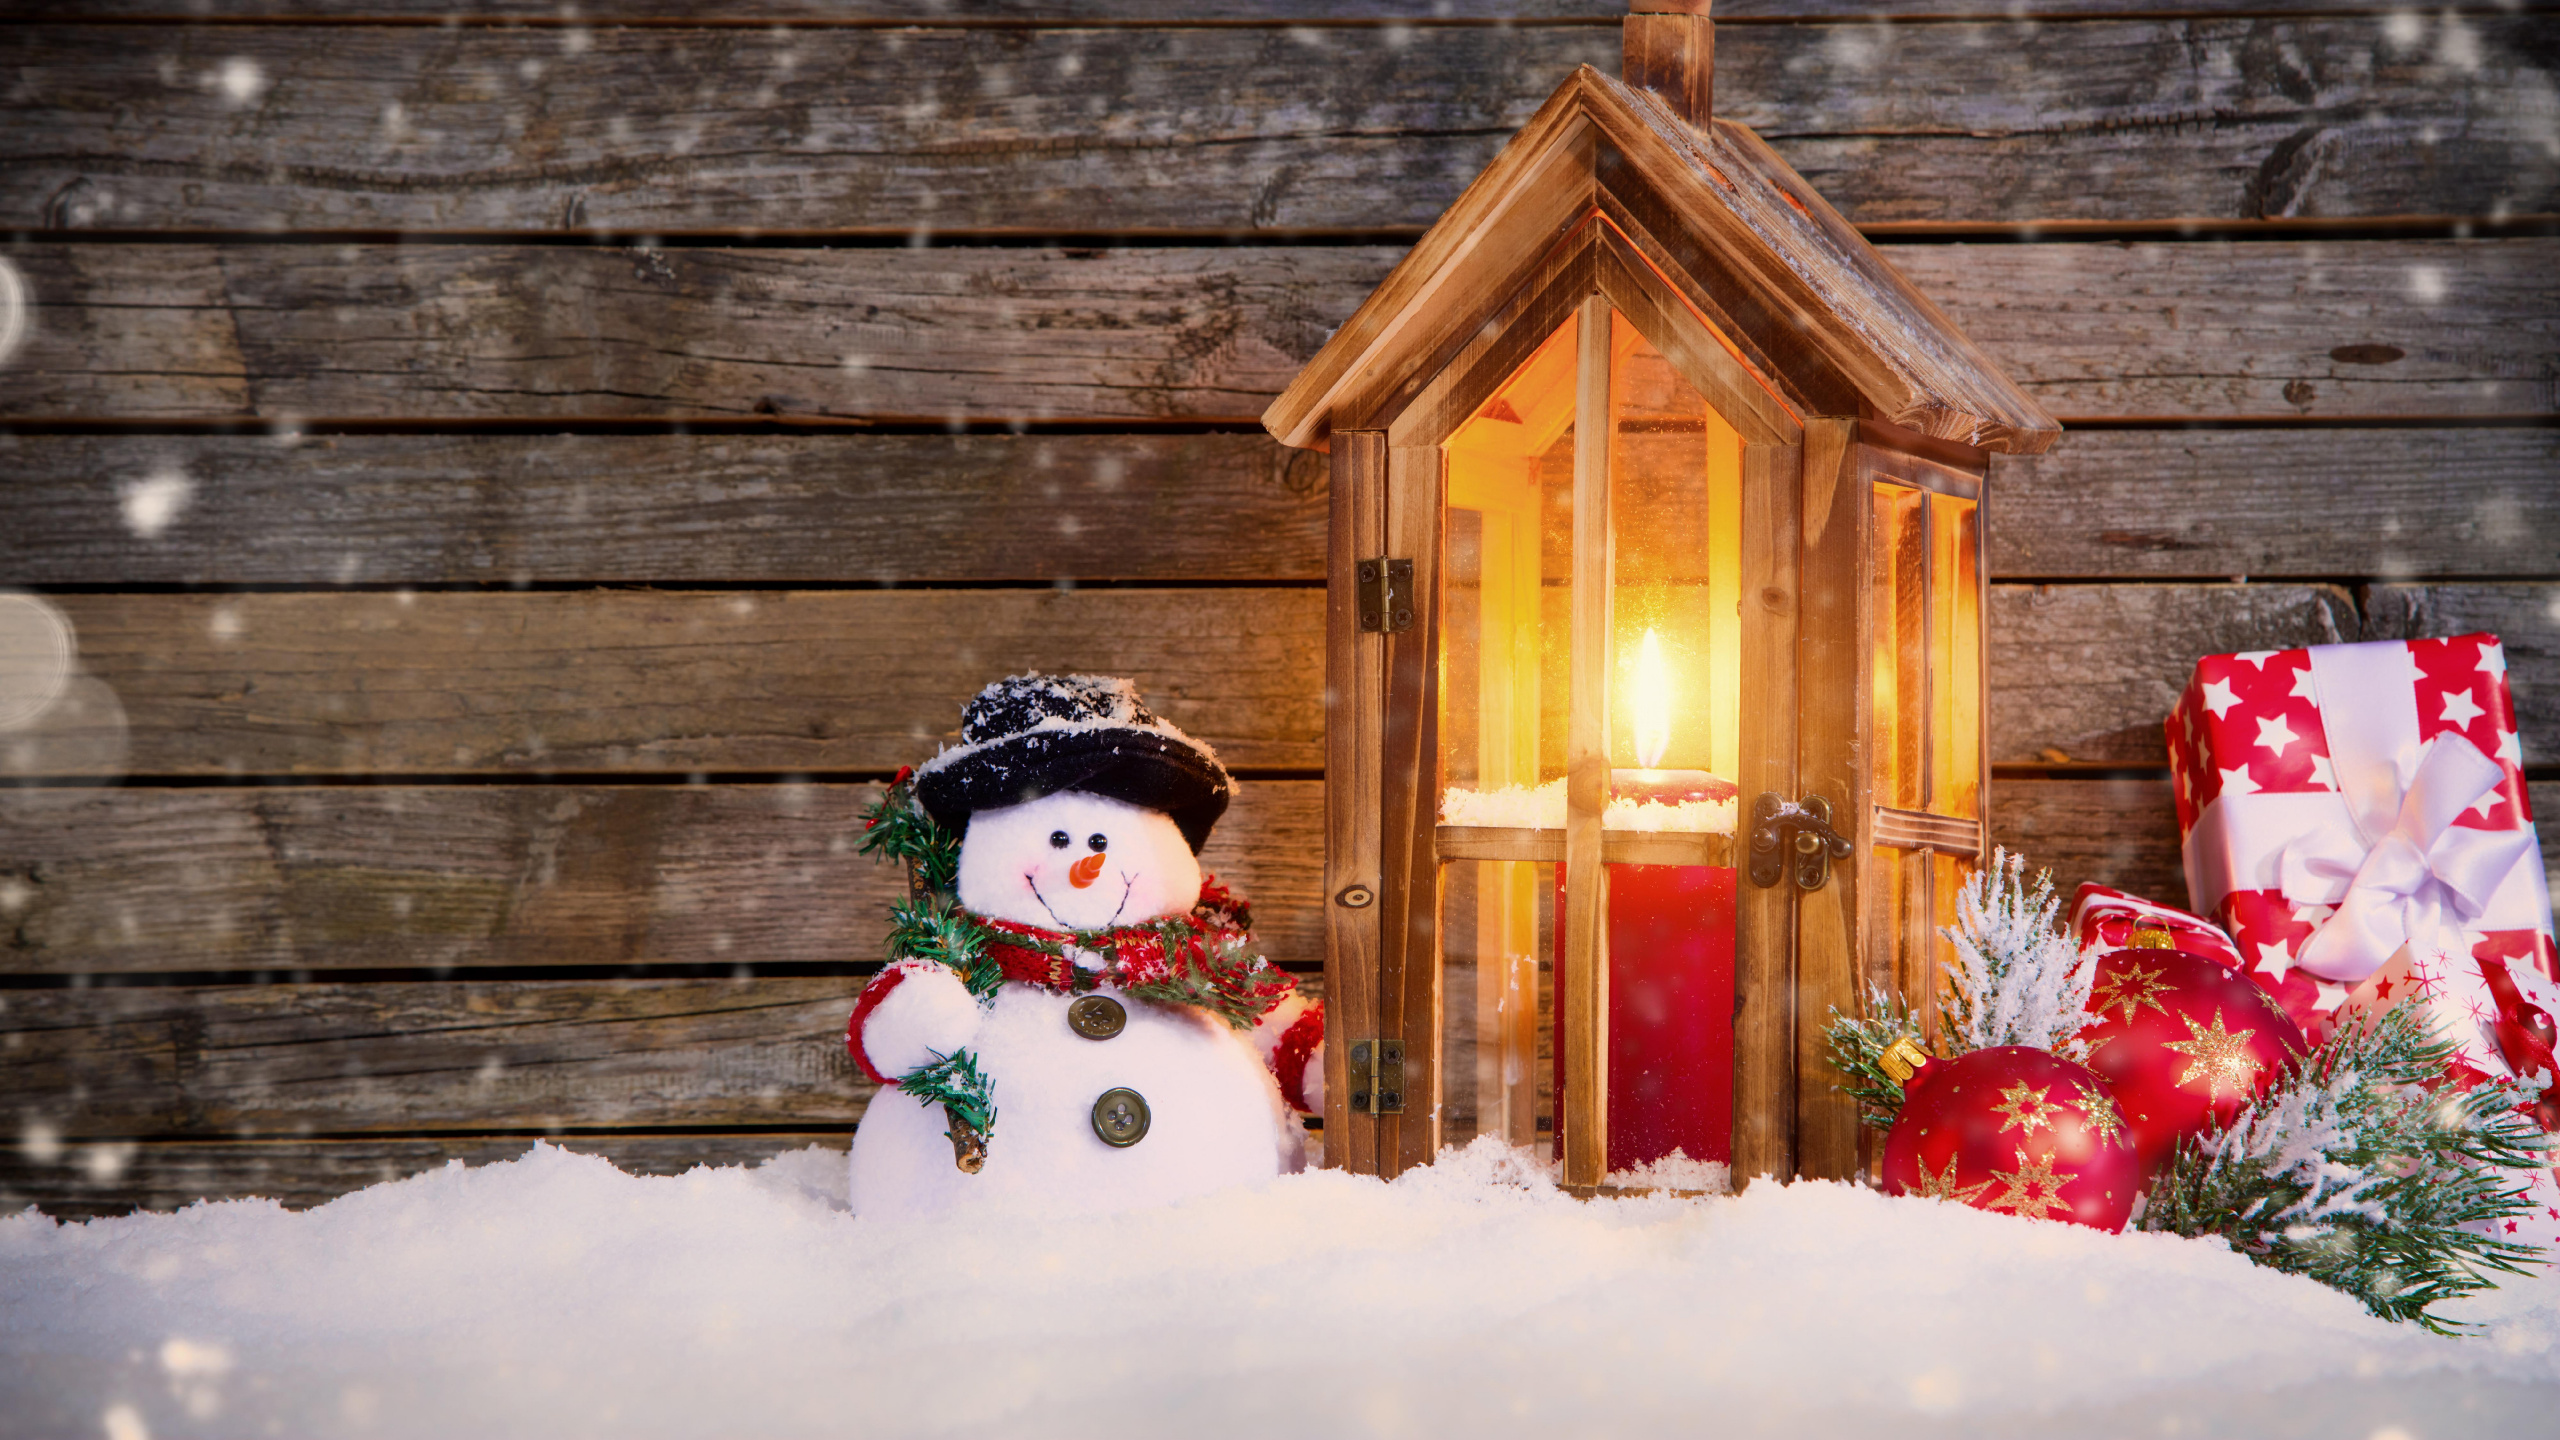 Christmas Day, Snowman, Christmas Decoration, Christmas Ornament, Snow. Wallpaper in 2560x1440 Resolution